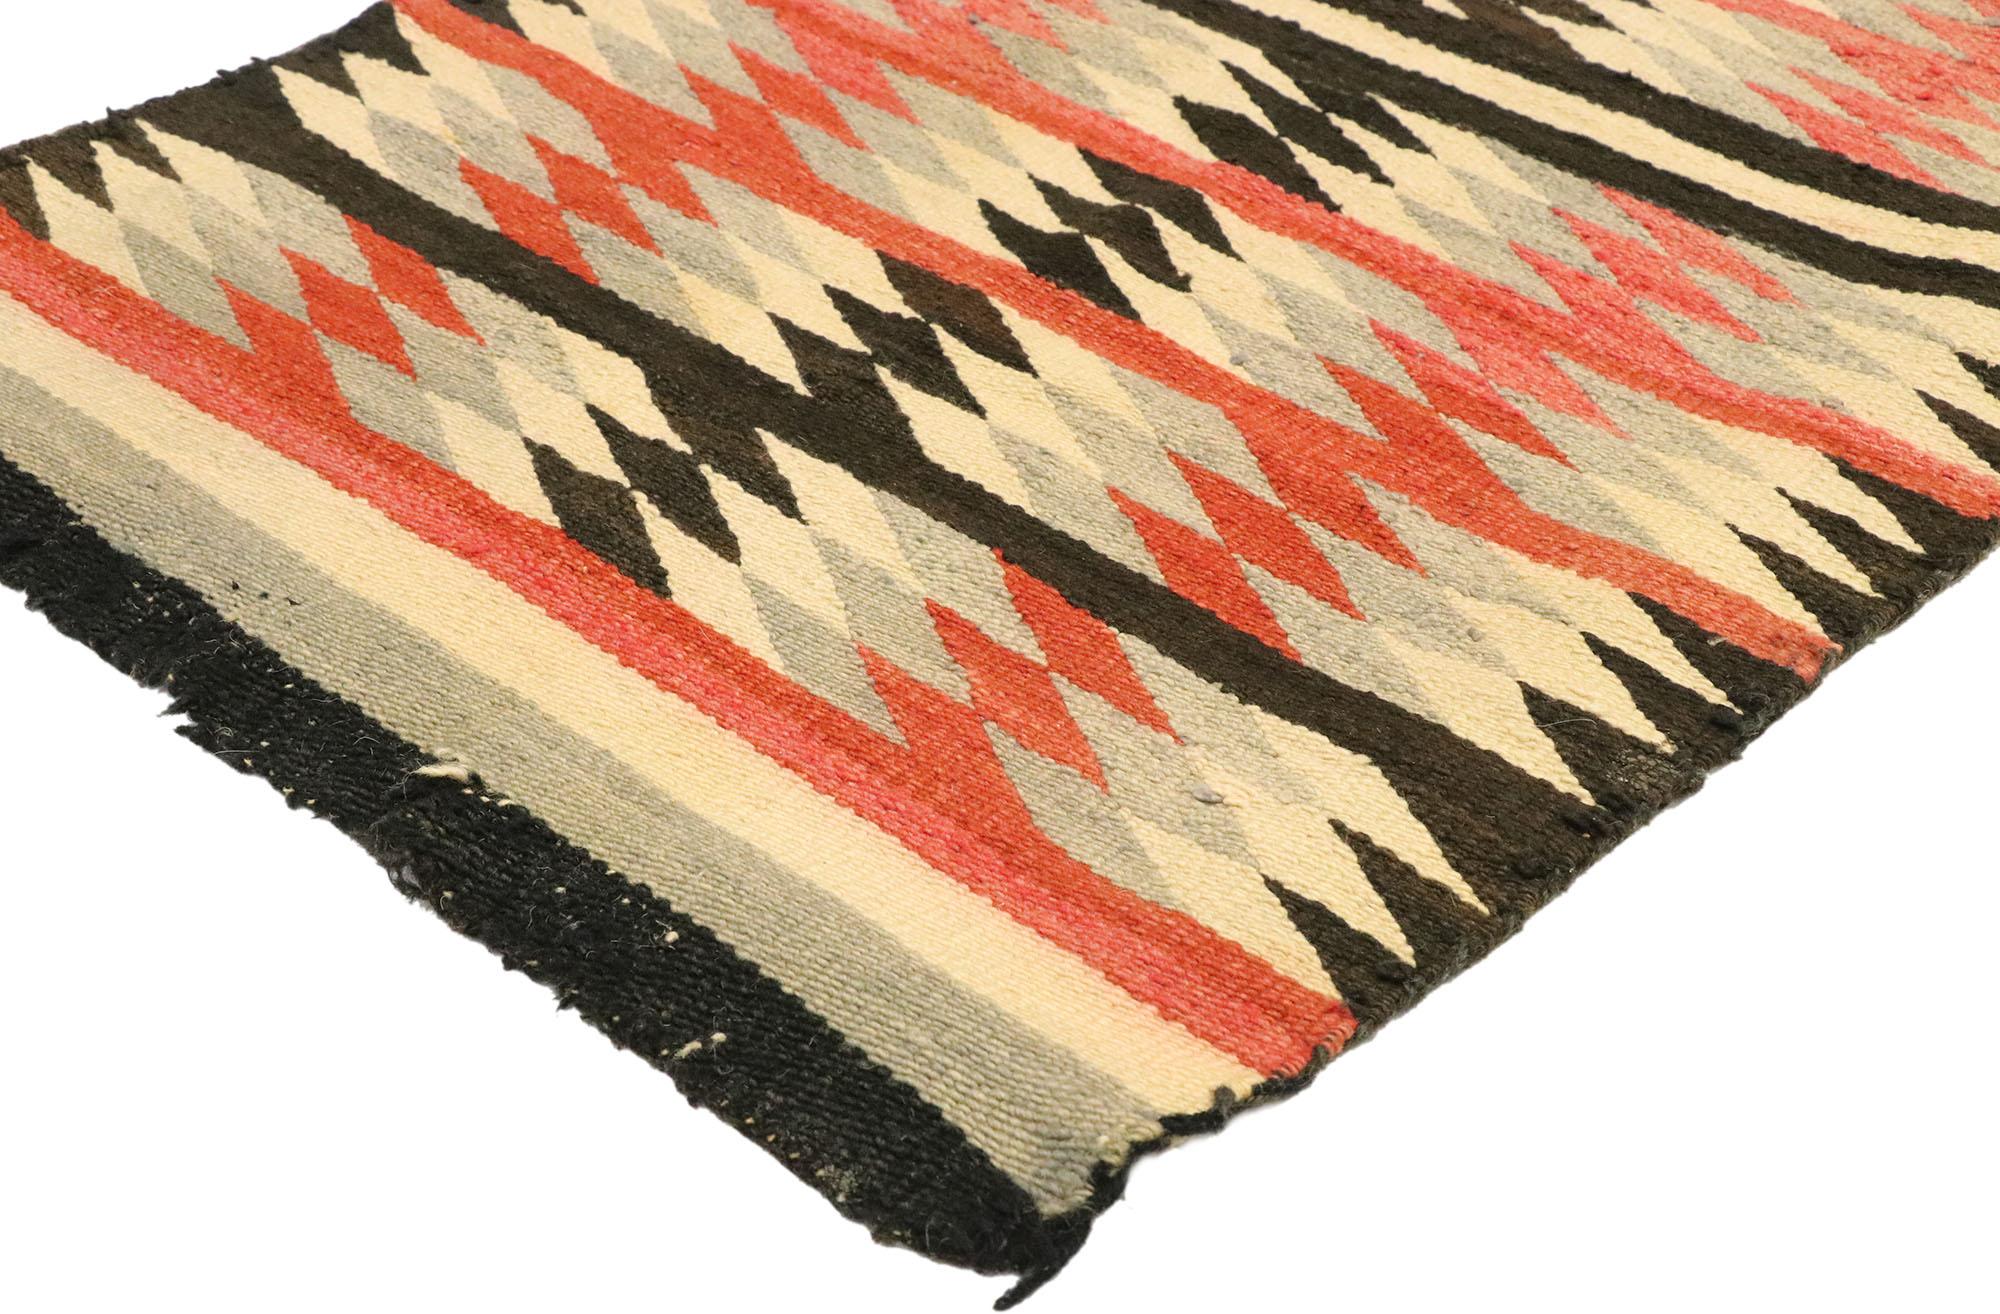 77489 vintage American Indian Navajo Kilim rug with two grey hills style. With its bold expressive design, incredible detail and texture, this handwoven wool vintage Navajo Kilim rug is a captivating vision of woven beauty highlighting Native